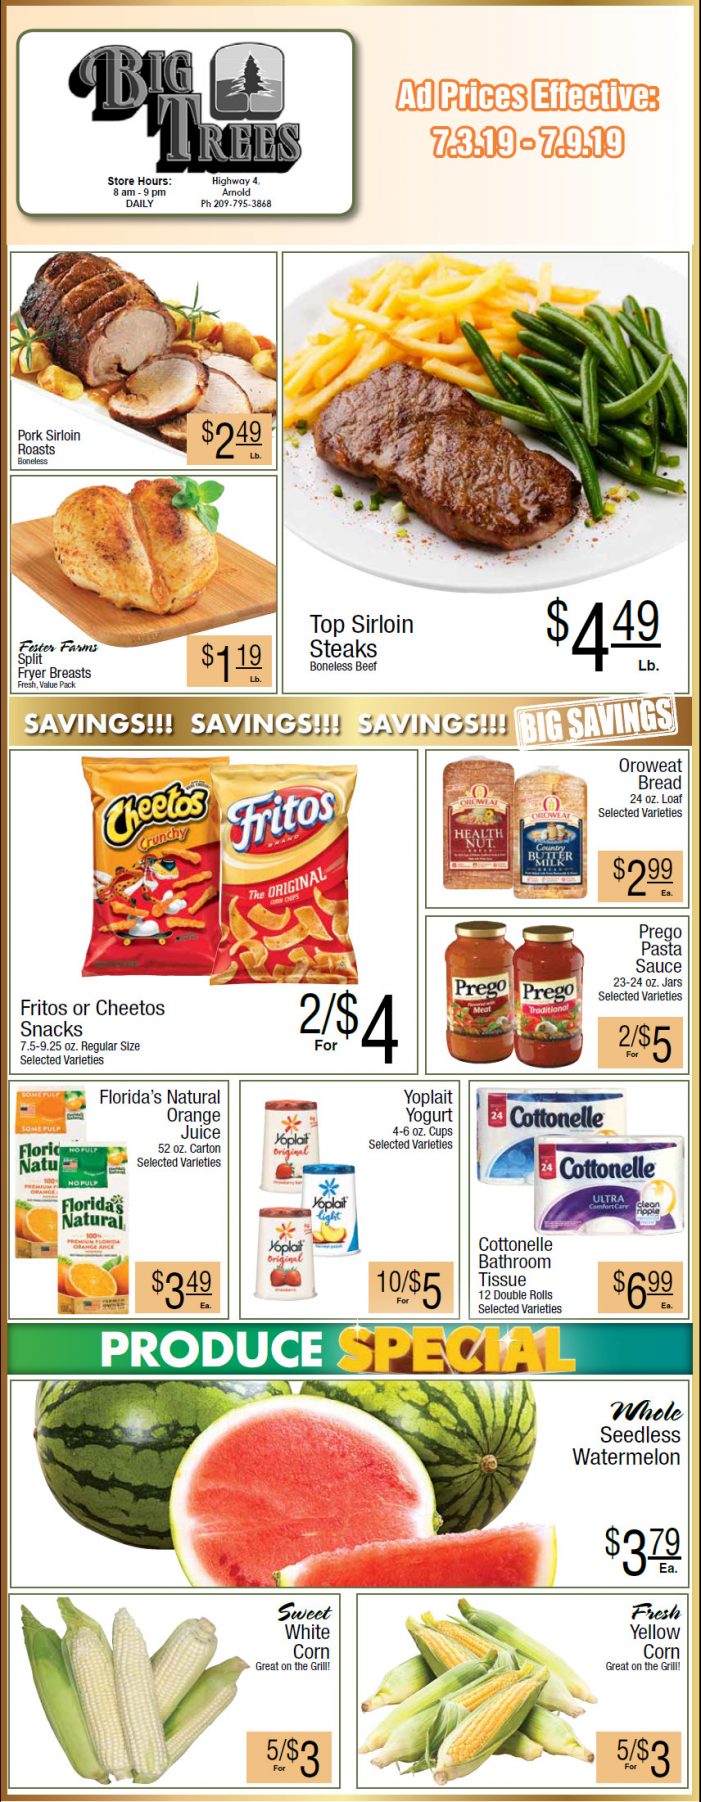 Big Trees Market Independence Weekend Grocery Ad & Weekly Specials Through July 9th